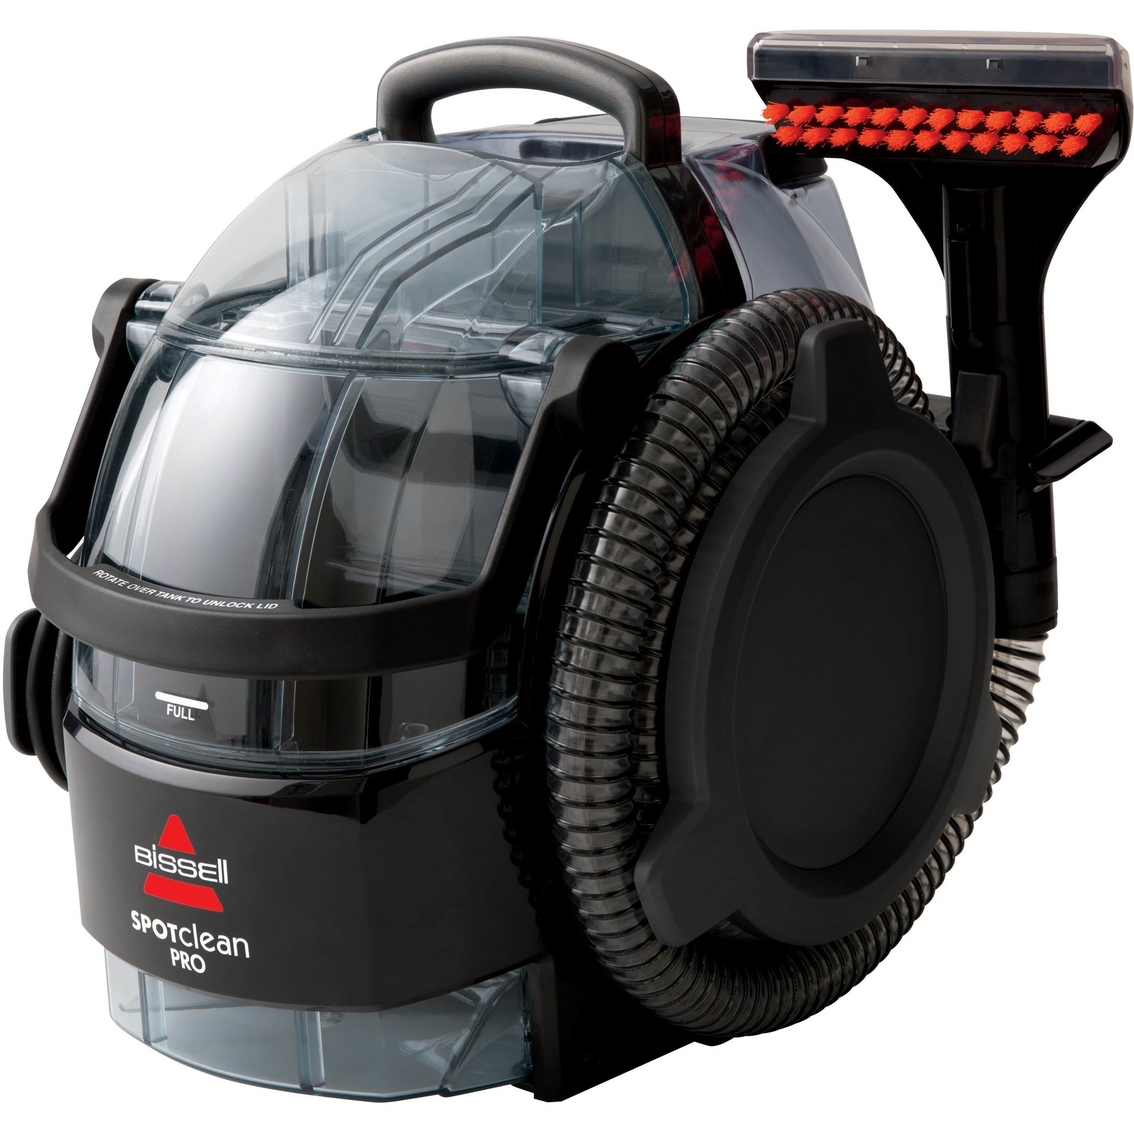 Bissell Spotclean Pro Portable Carpet Cleaner Carpet Cleaners Home & Appliances Shop The